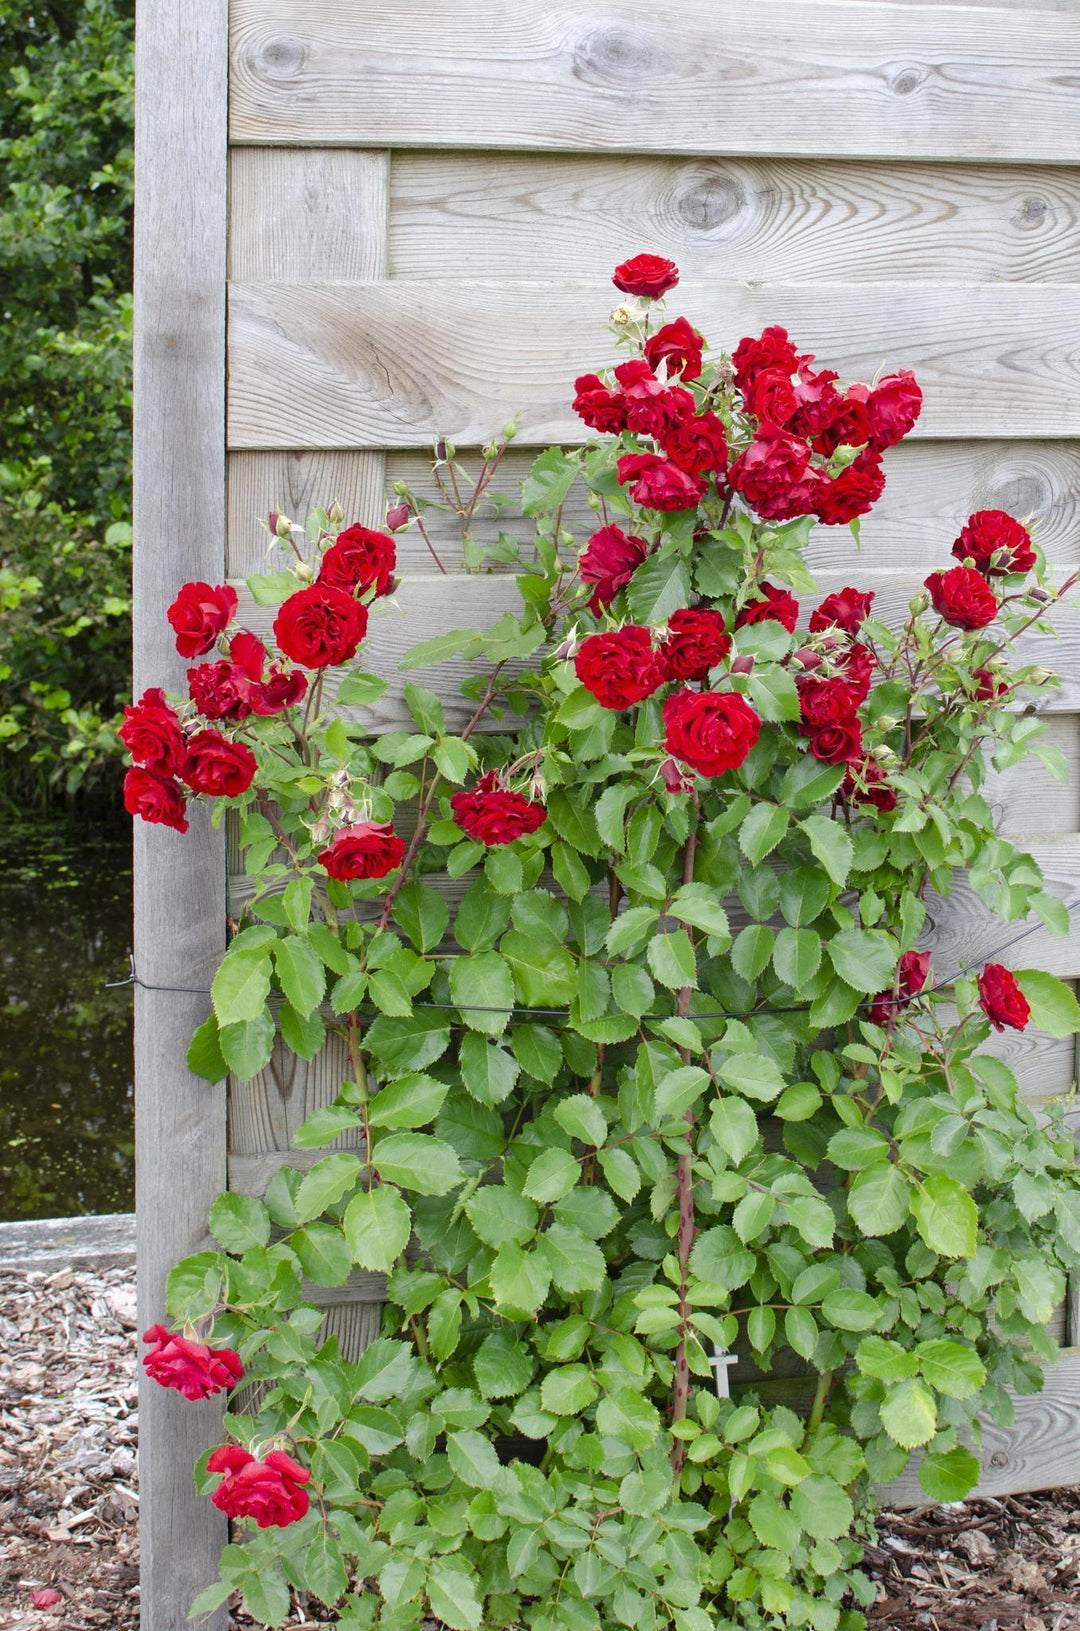 Rosa Crazy in love 'Red' - ↨65cm - Ø15-Plant-Botanicly